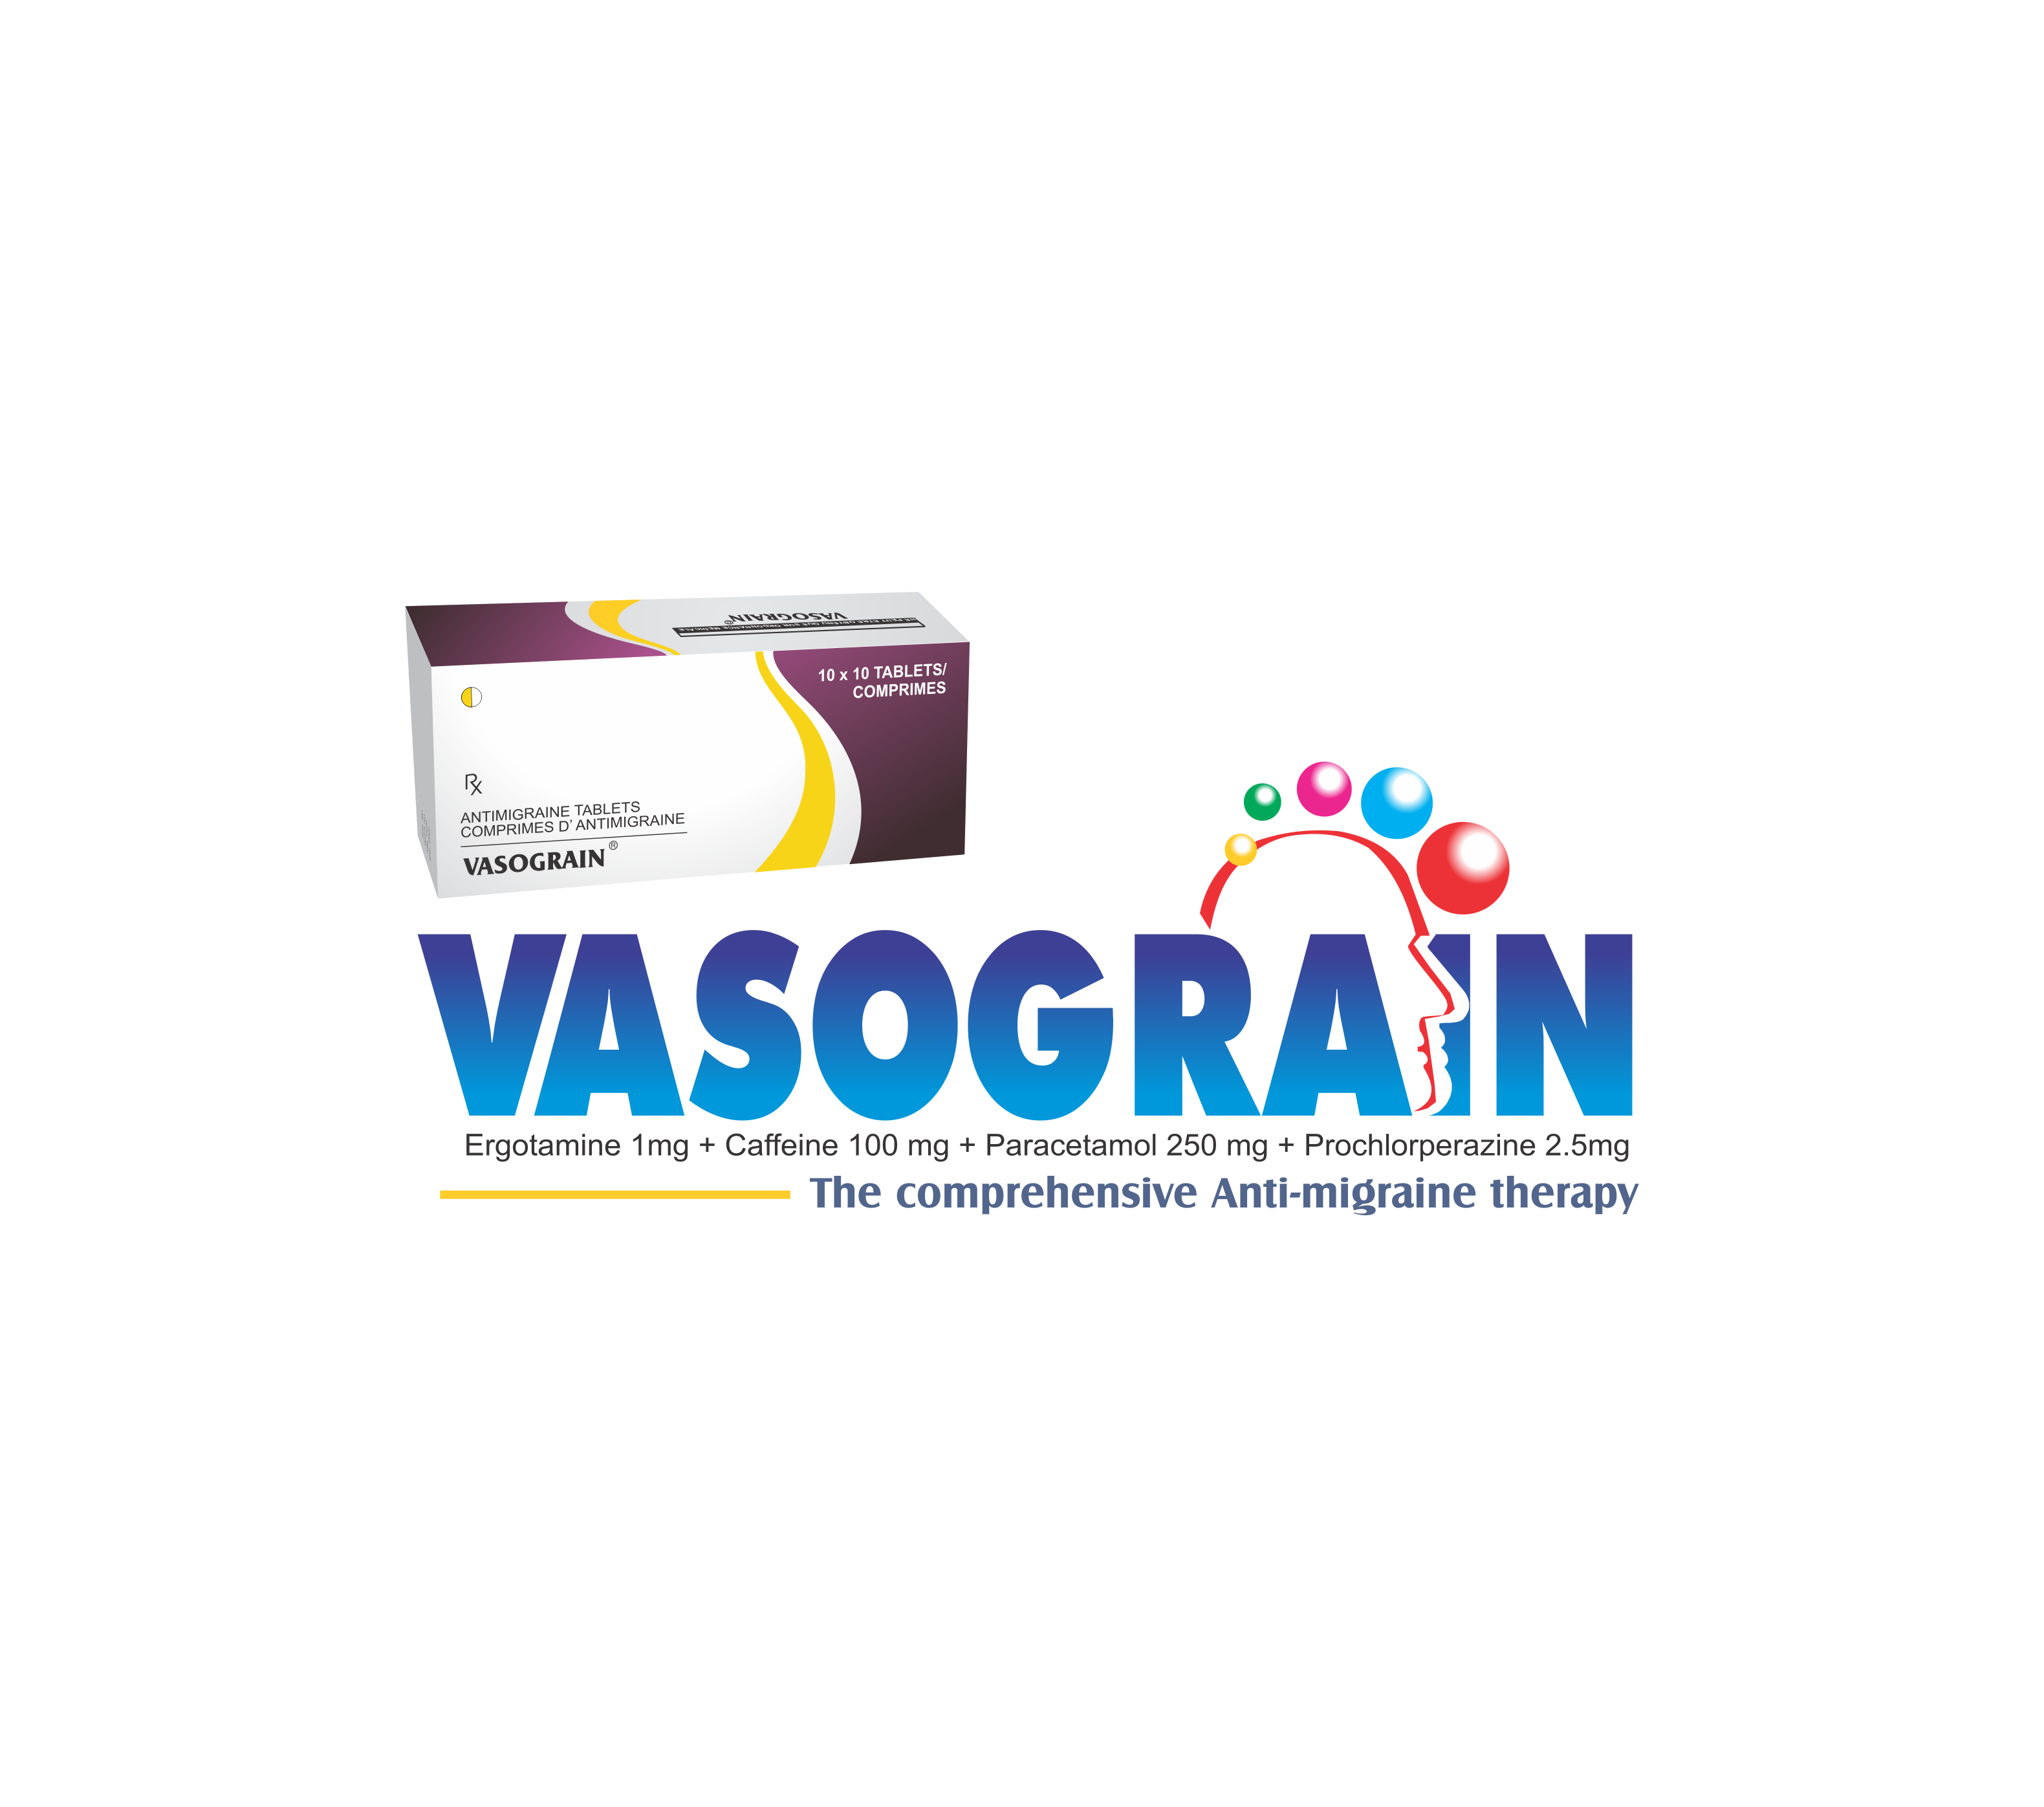 Cadila Pharmaceuticals' drug called Vasograin is a one stop solution for migraine